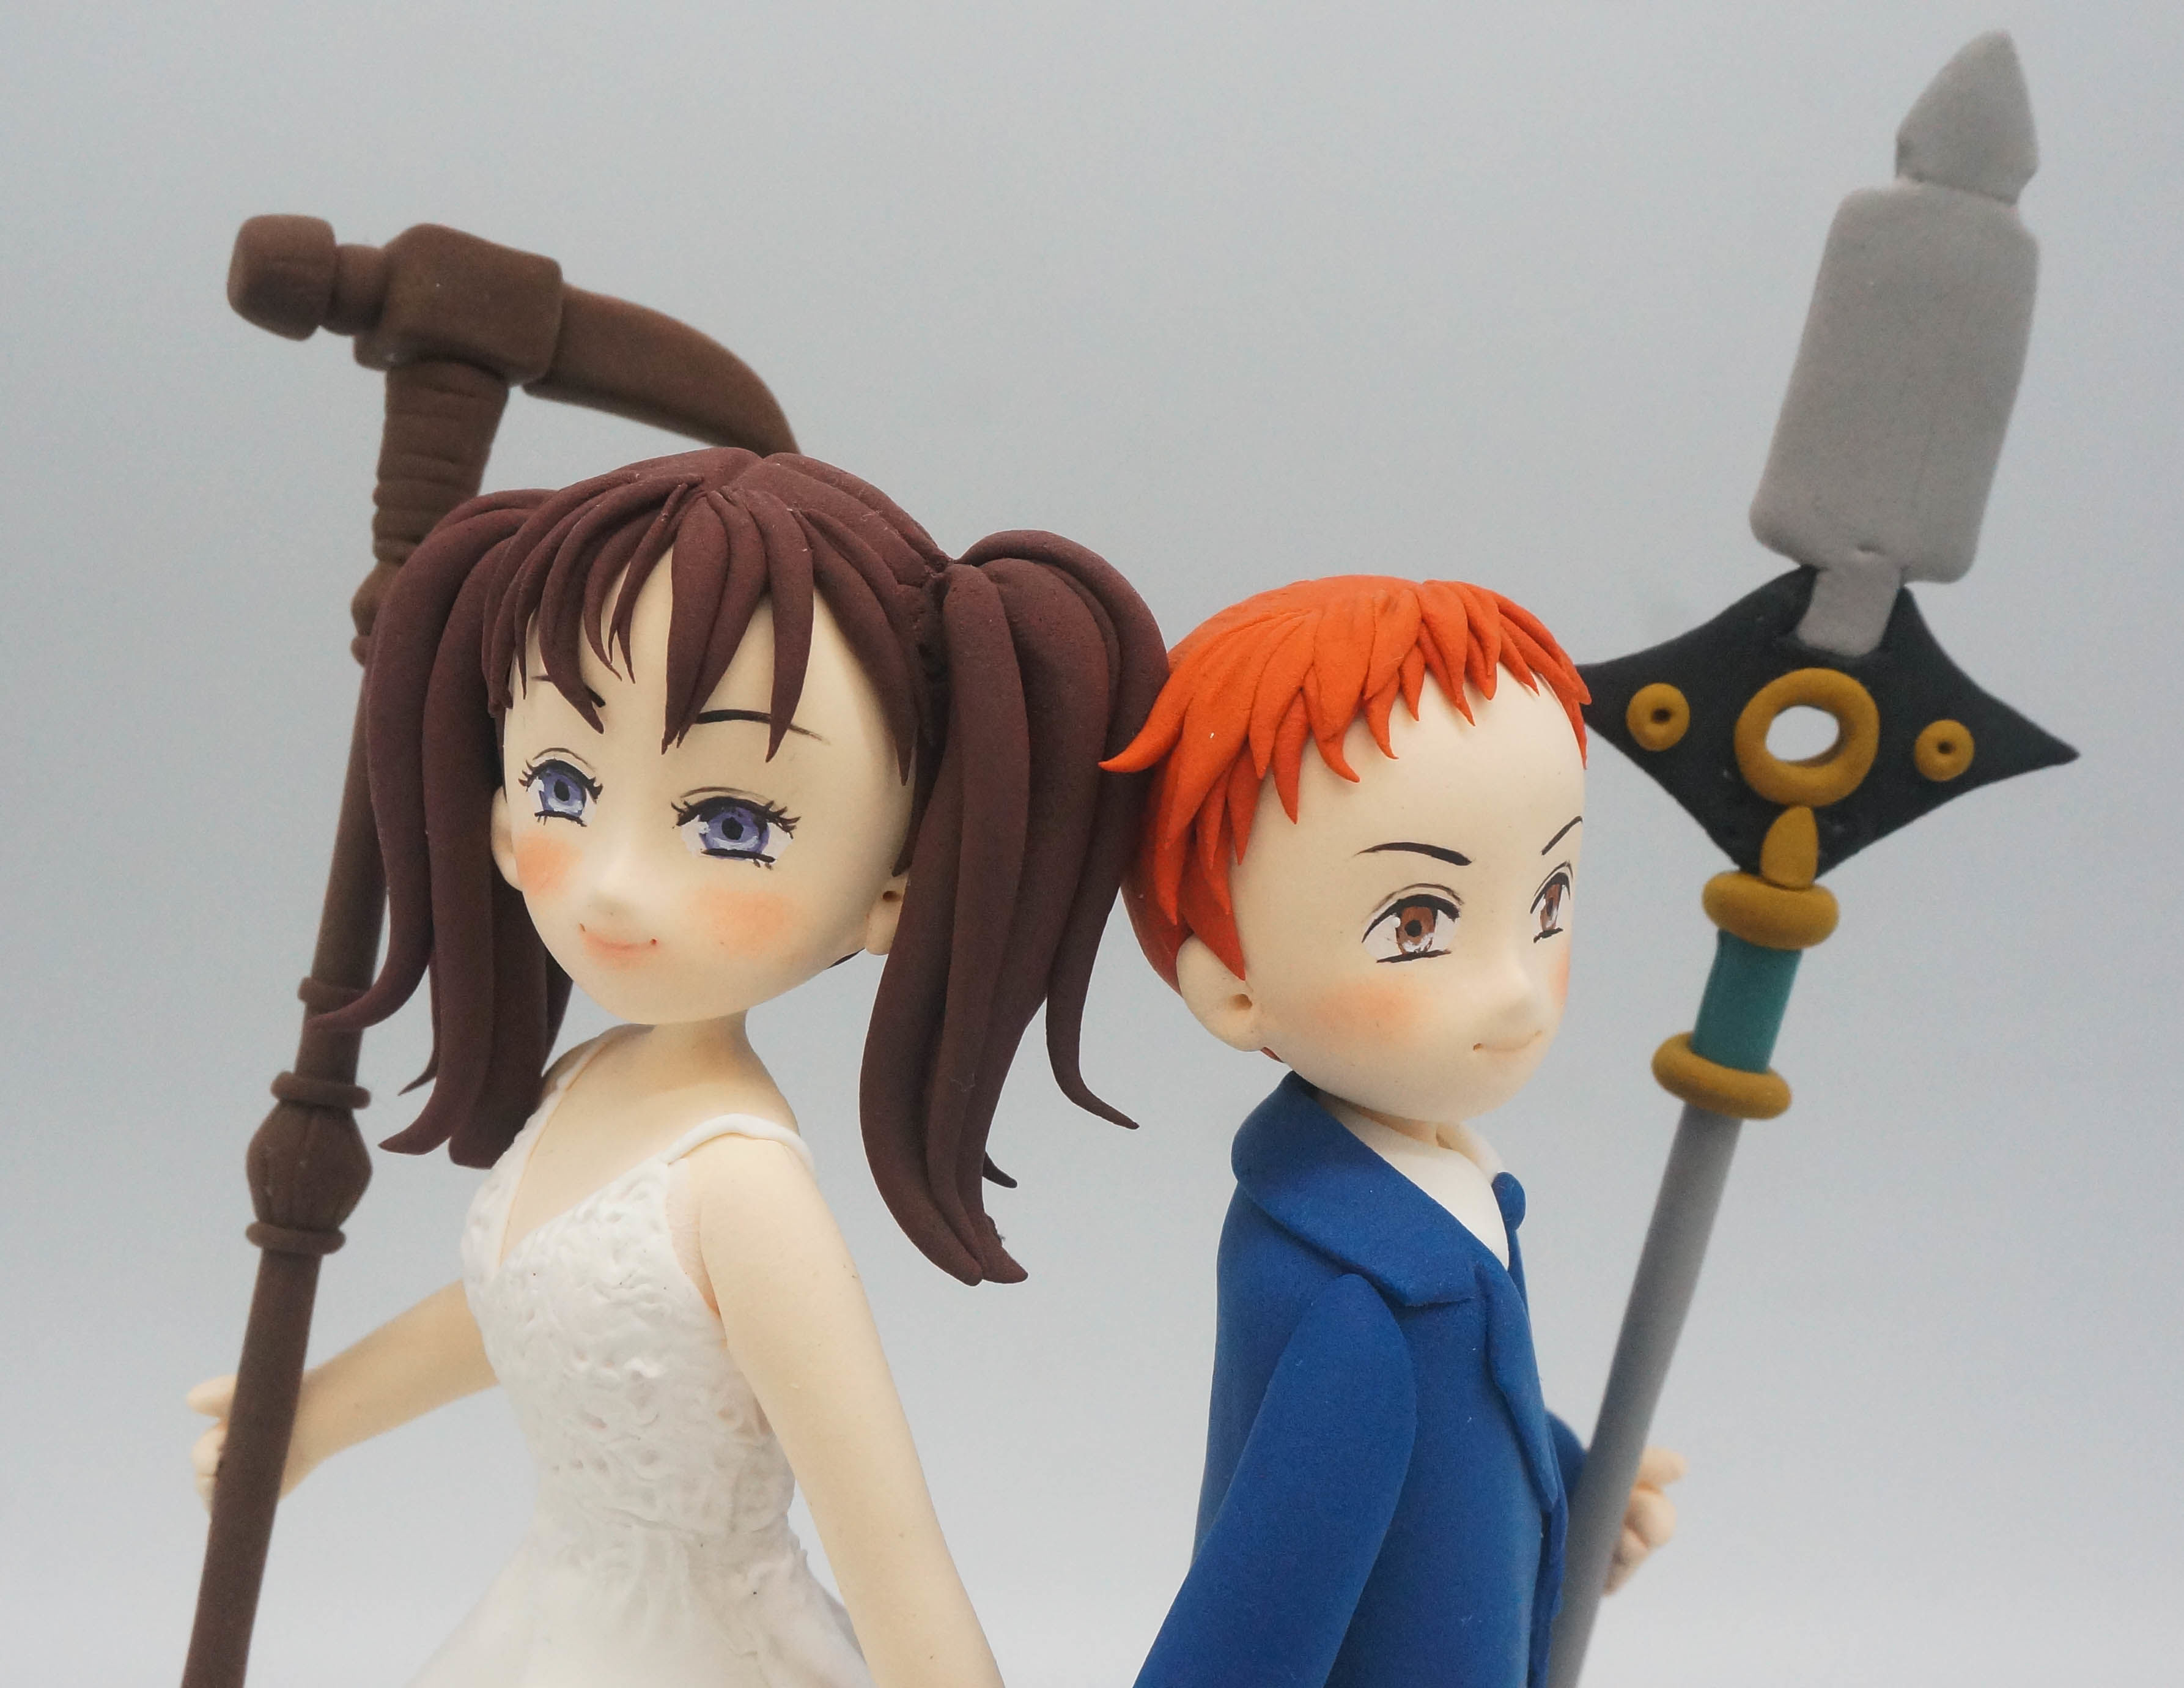 World Cake Topper. Geeky Anime Fandom With Inspired Seven Deadly Sins  Wedding Cake Topper